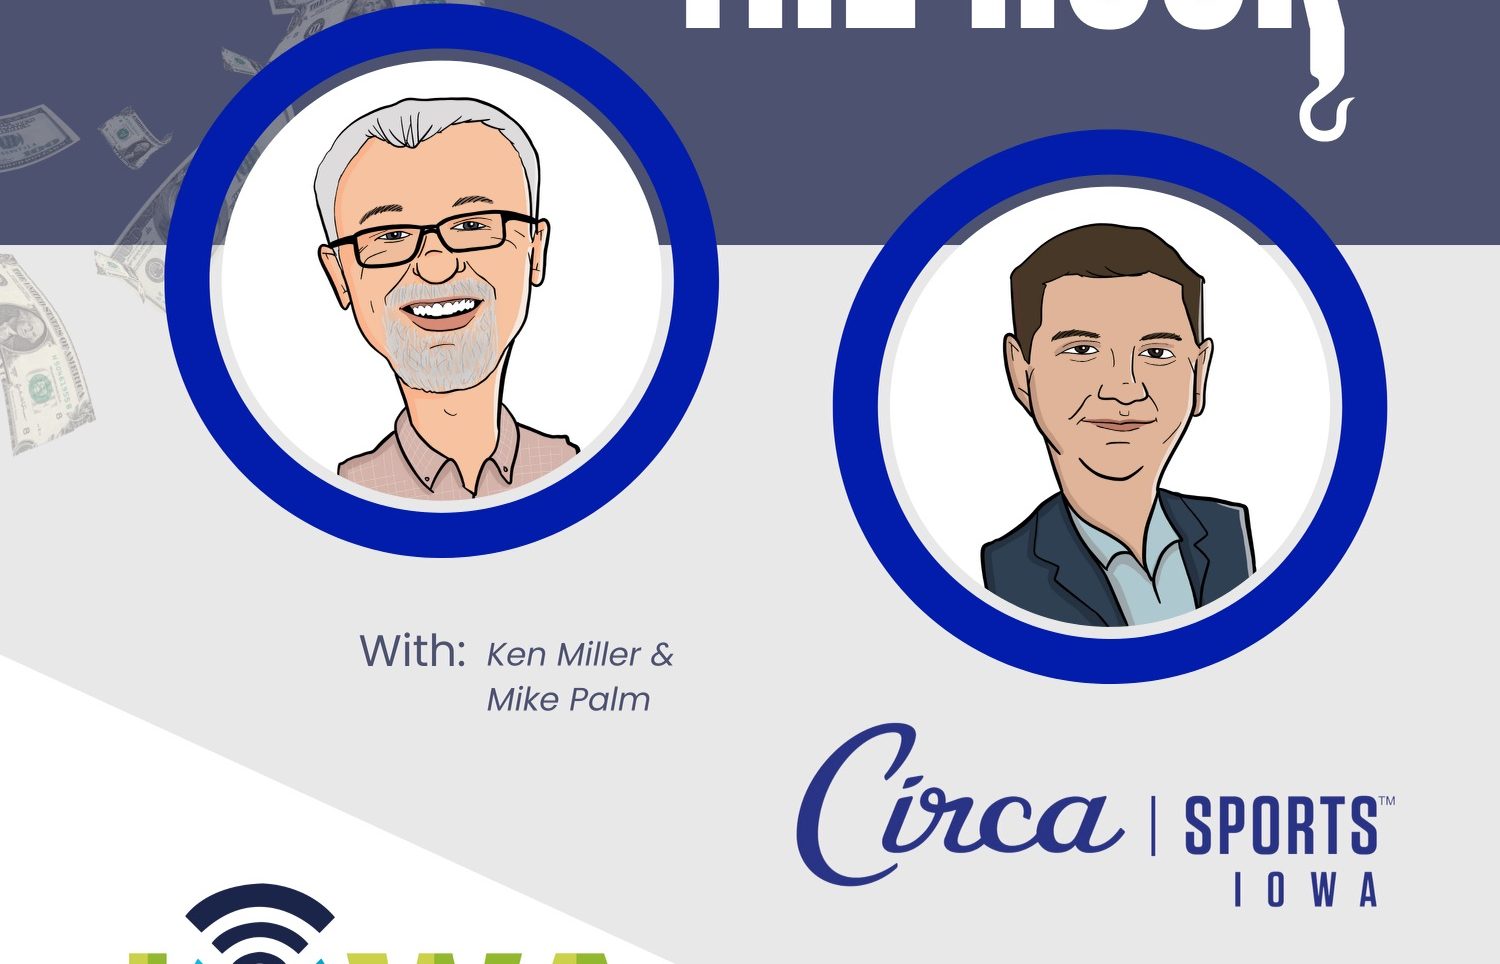 The Hook with Ken Miller & Mike Palm: Super Bowl prep